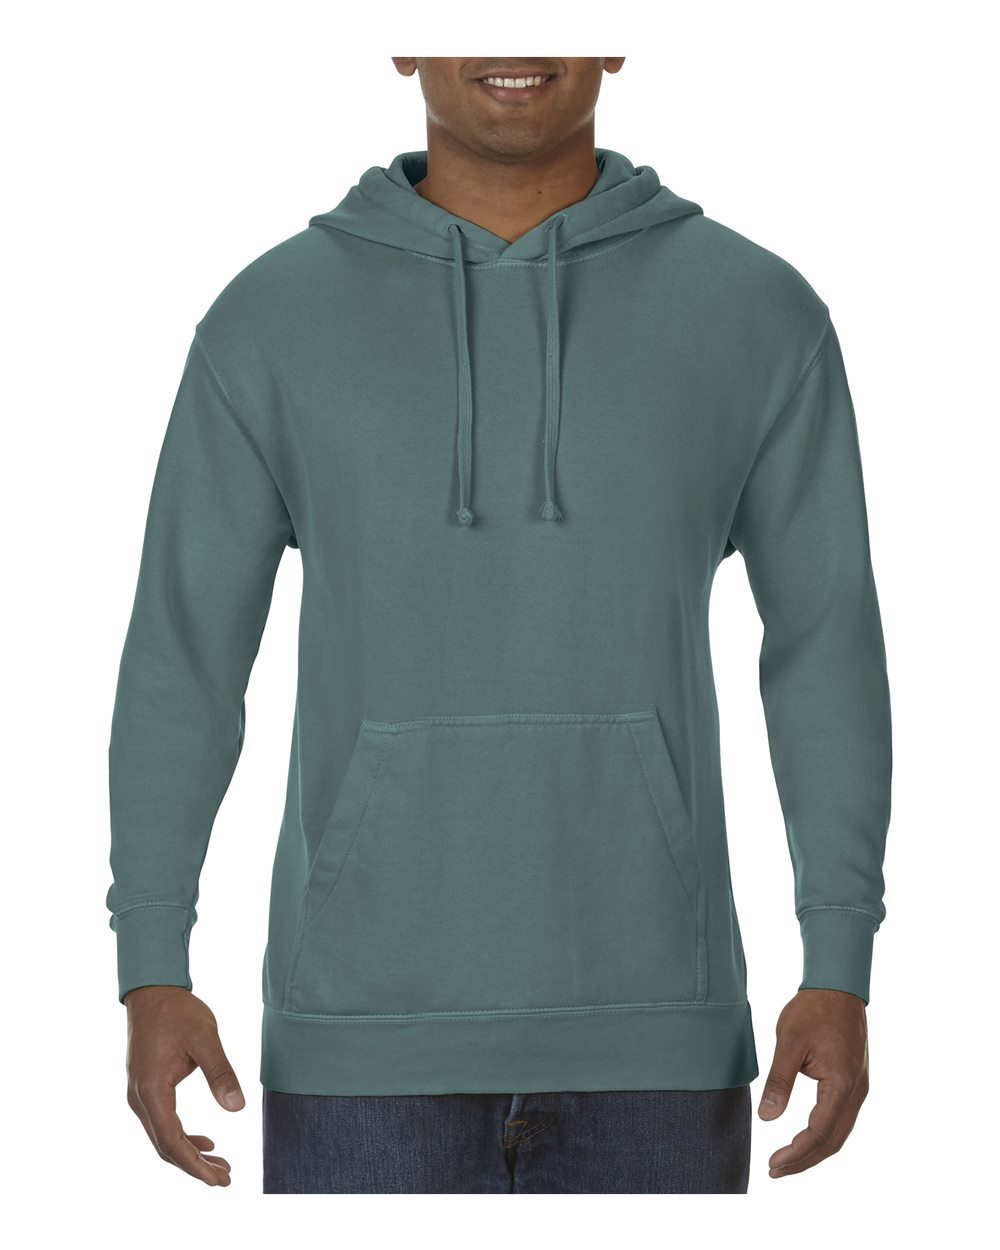 Comfort Colors Garment-Dyed Hooded Sweatshirt 1567 [from $50.24 ...